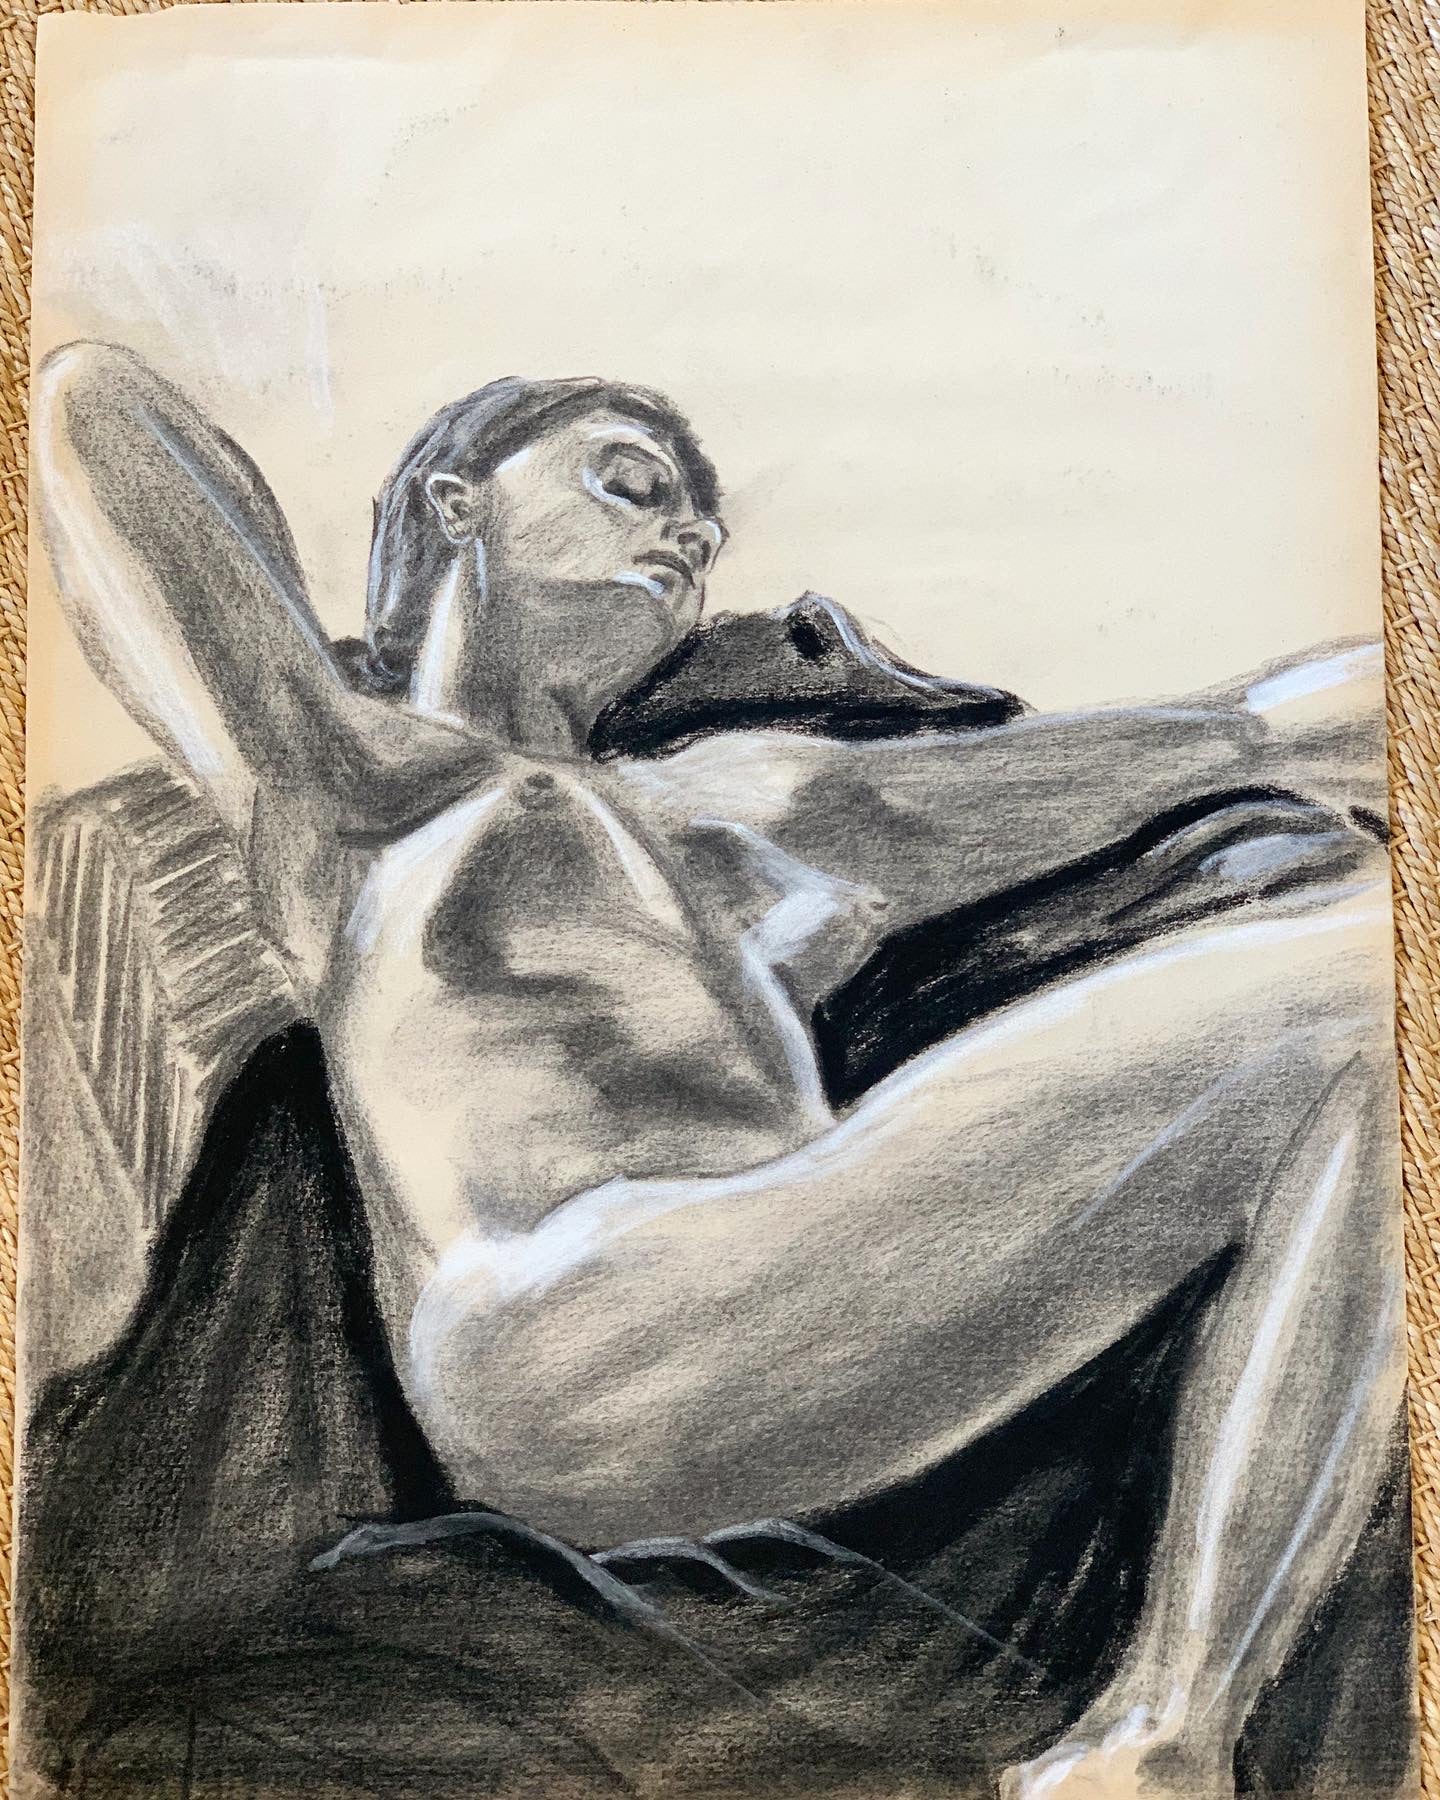 "Reclining Female Nude on Blanket #7” by Curtis